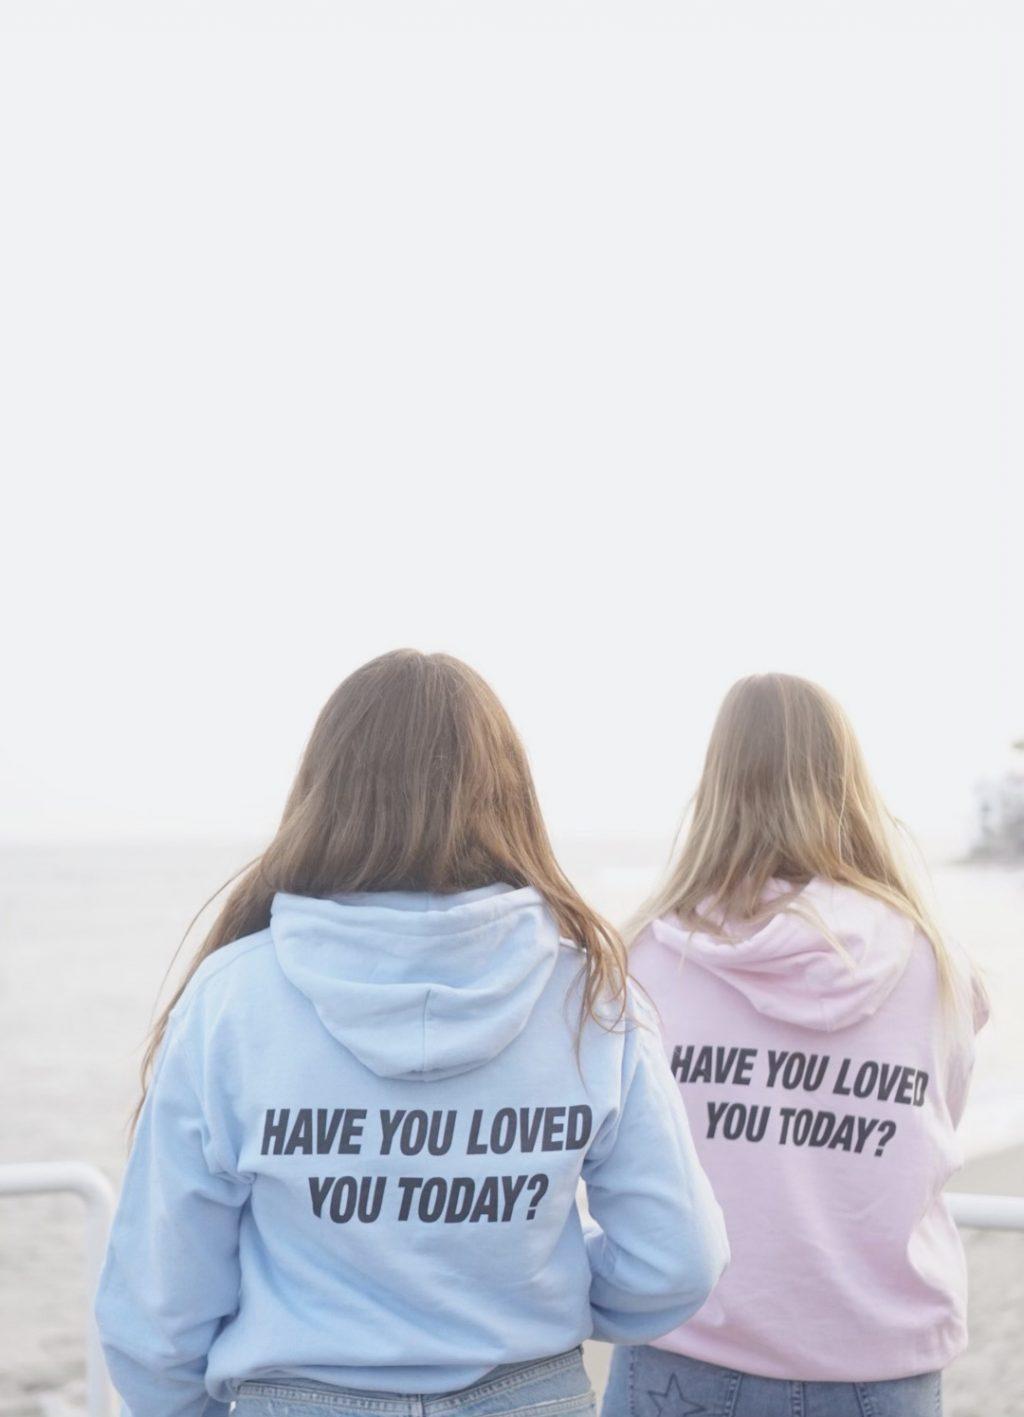 Sophomores Blakely Huff (left) and Clare Cornelius (right) promote Gearhart&squot;s new company in her "Have you loved today?" sweatshirts in September at Ralphs Beach in Malibu. Gearhart said her main mission is to spread self-love and positivity with her company.